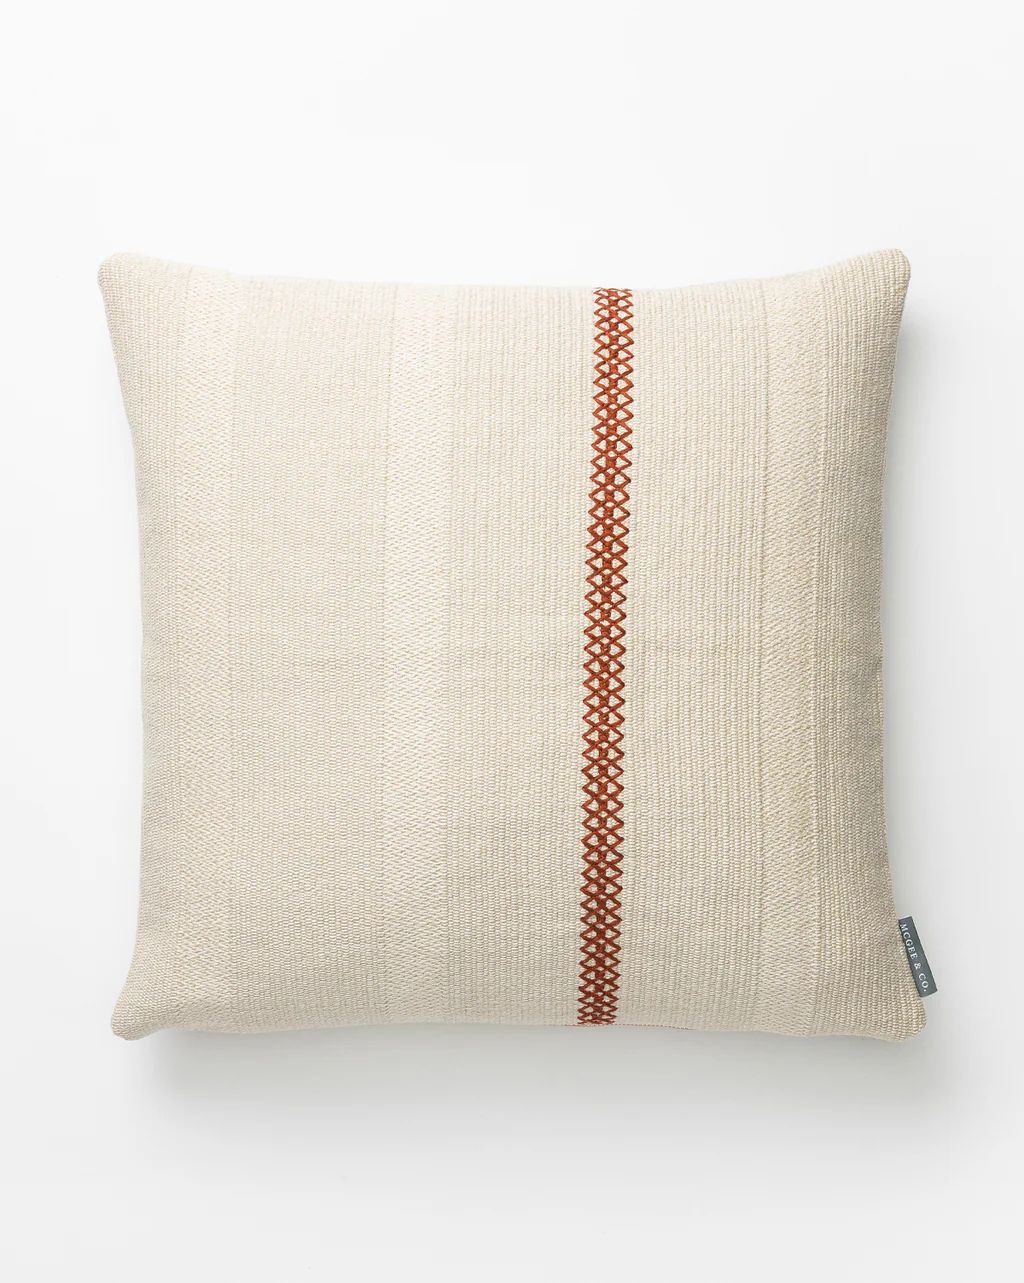 Willy Pillow Cover | McGee & Co.